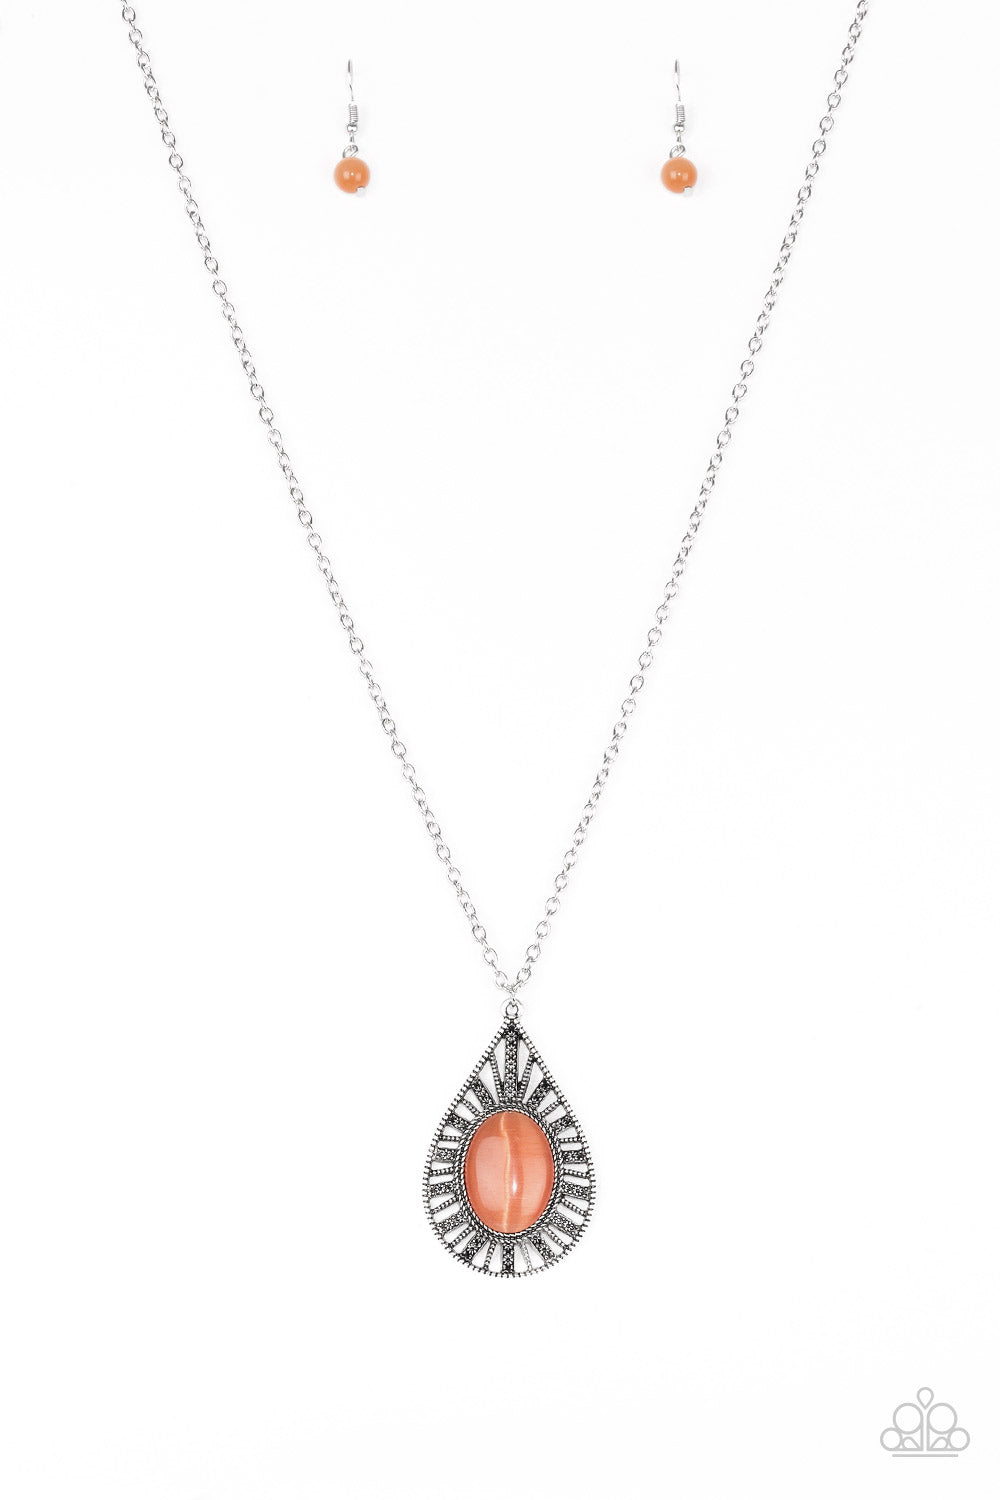 Total Tranquility Necklace__Orange